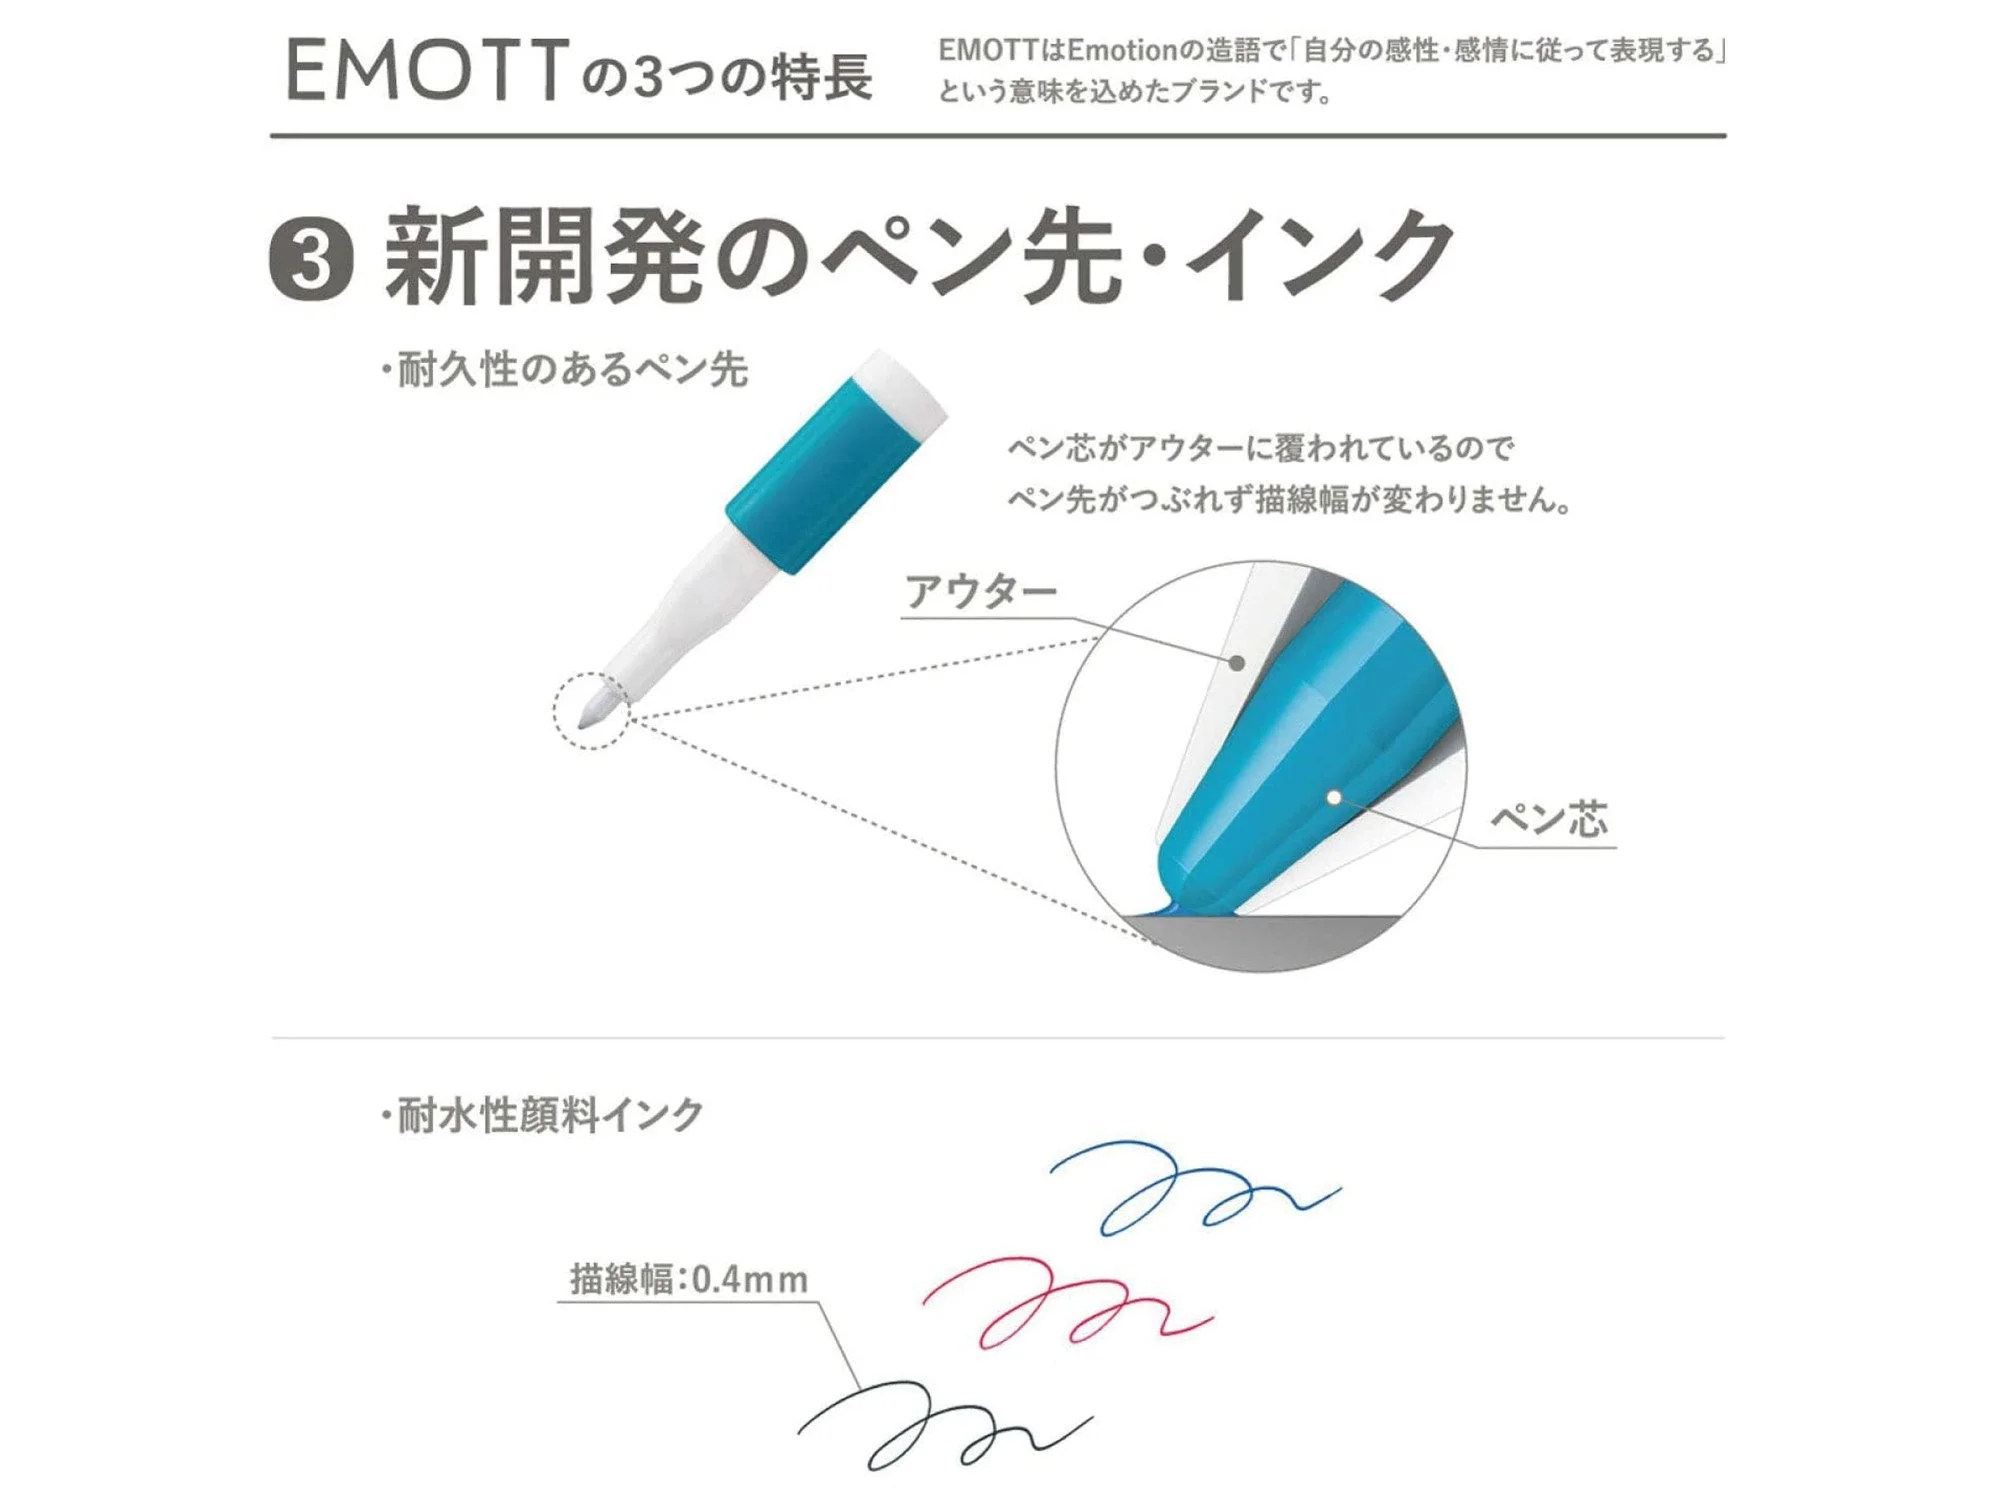 Make amazing journal pages with the new EMOTT pen collections 